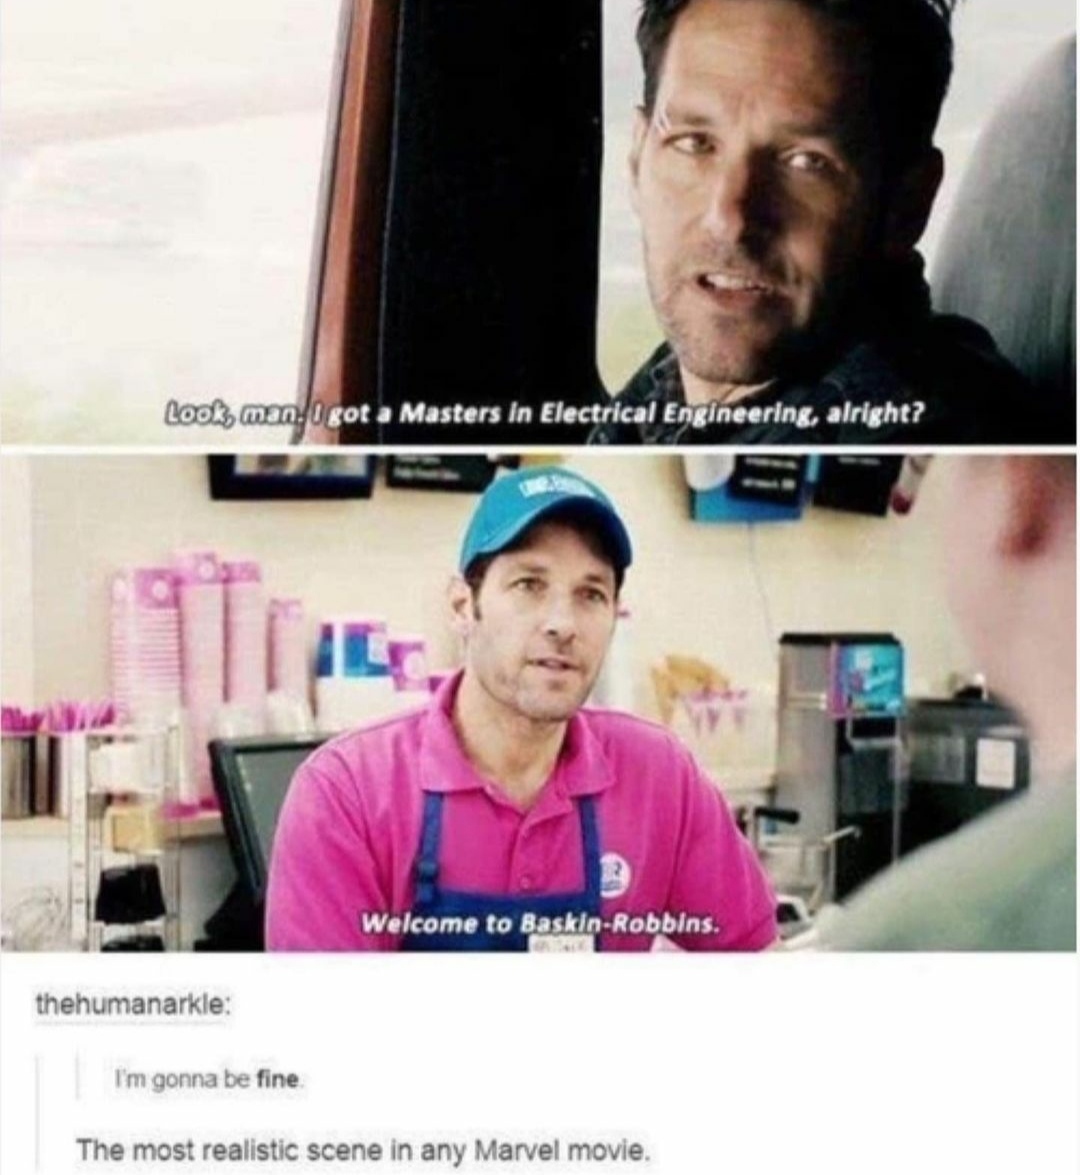 funny memes and pics - ant man memes - Look, man, I got a Masters in Electrical Engineering, alright? Welcome to BaskinRobbins. thehumanarkle I'm gonna be fine The most realistic scene in any Marvel movie.